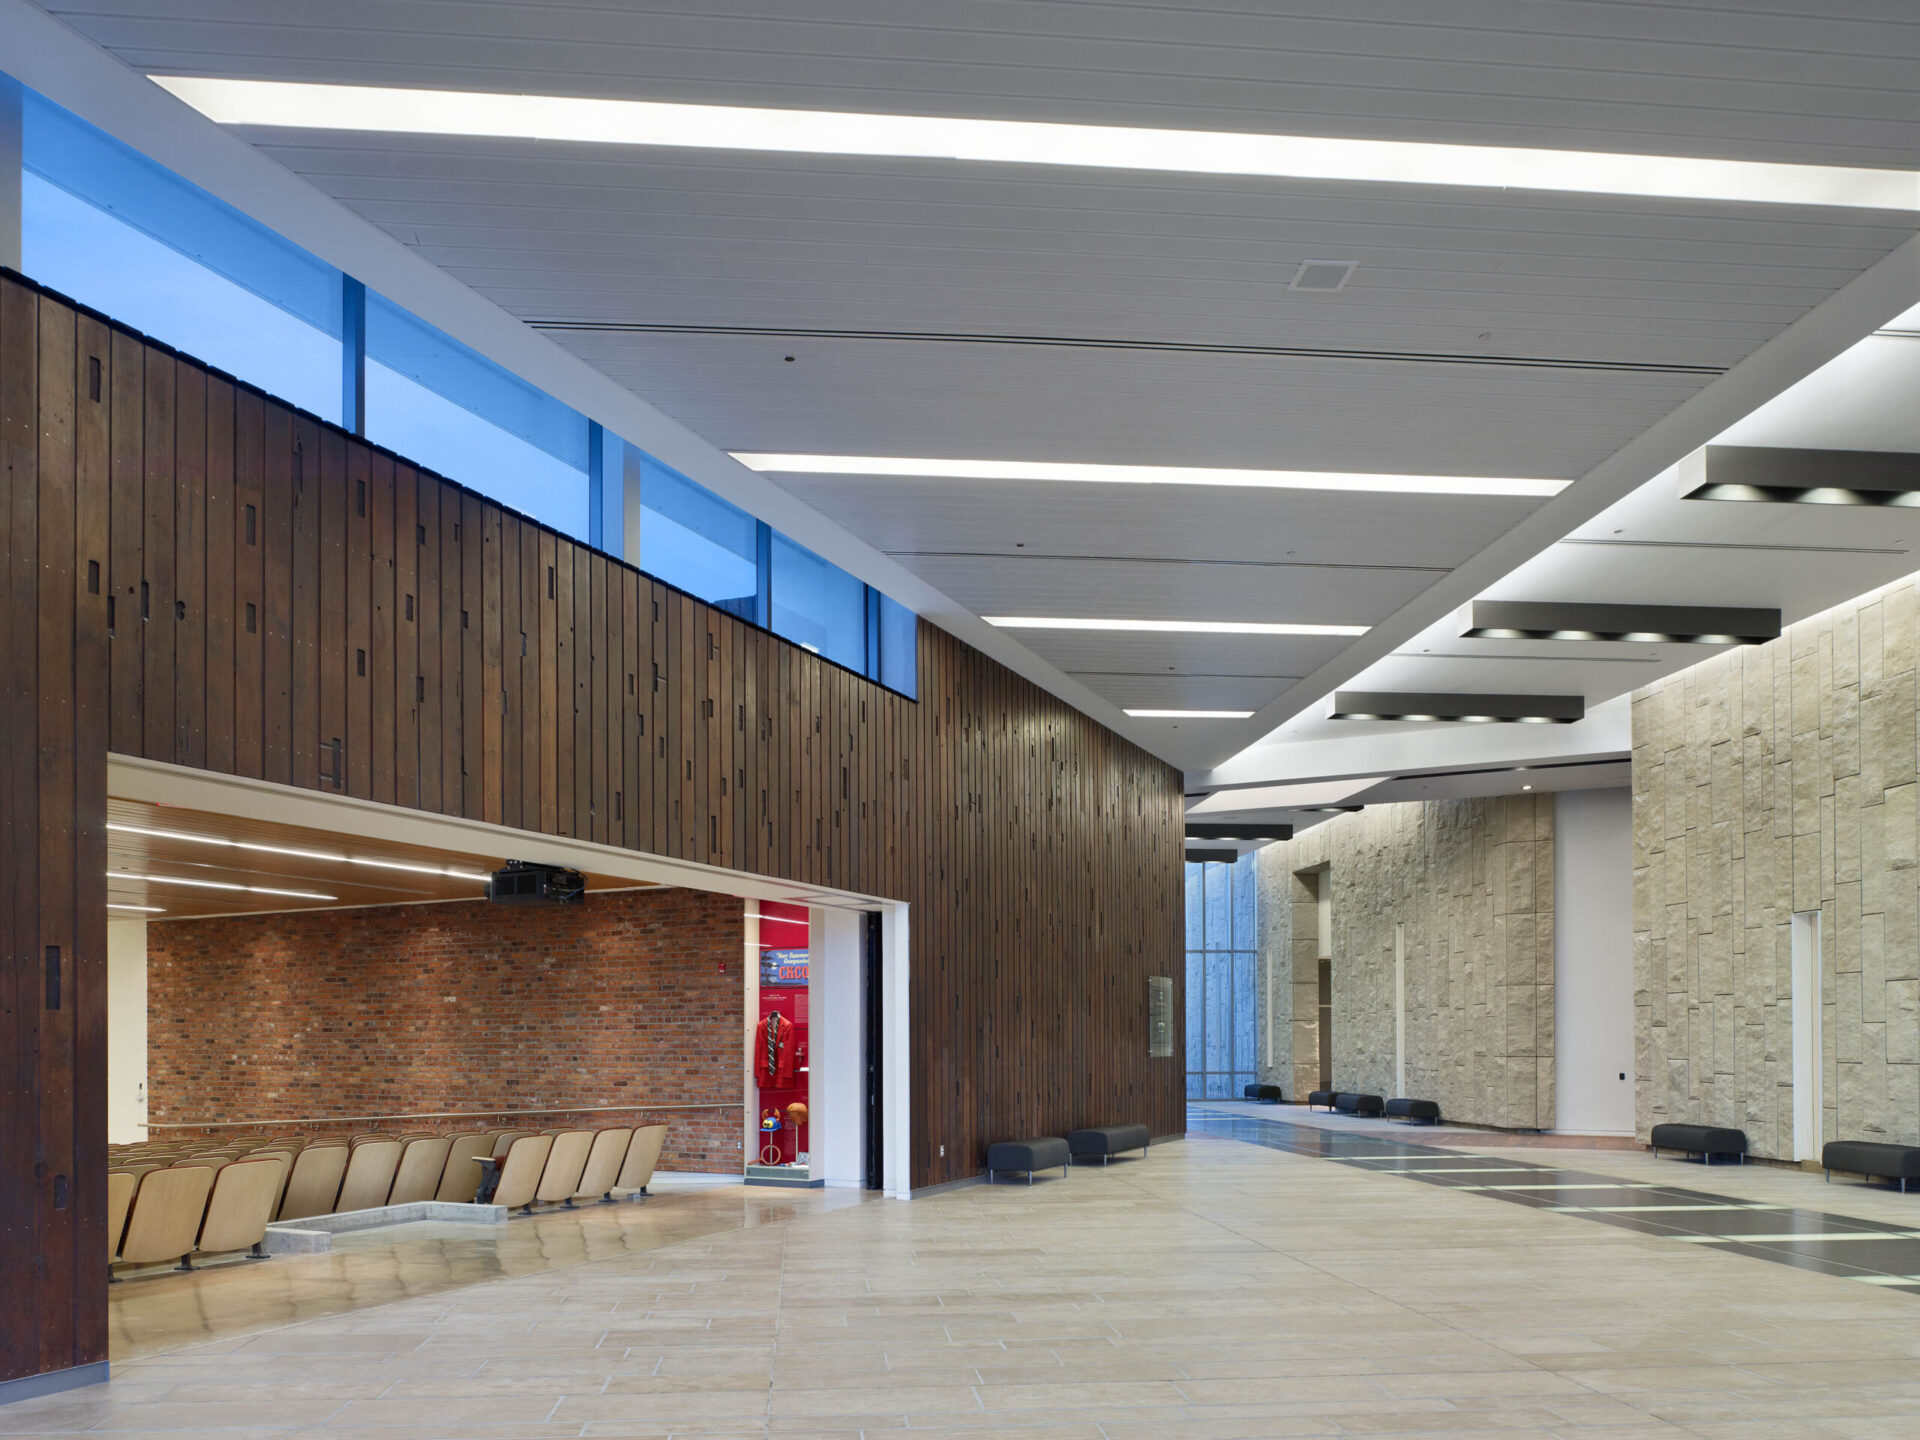 The lobby of a large architectural building with wooden walls.